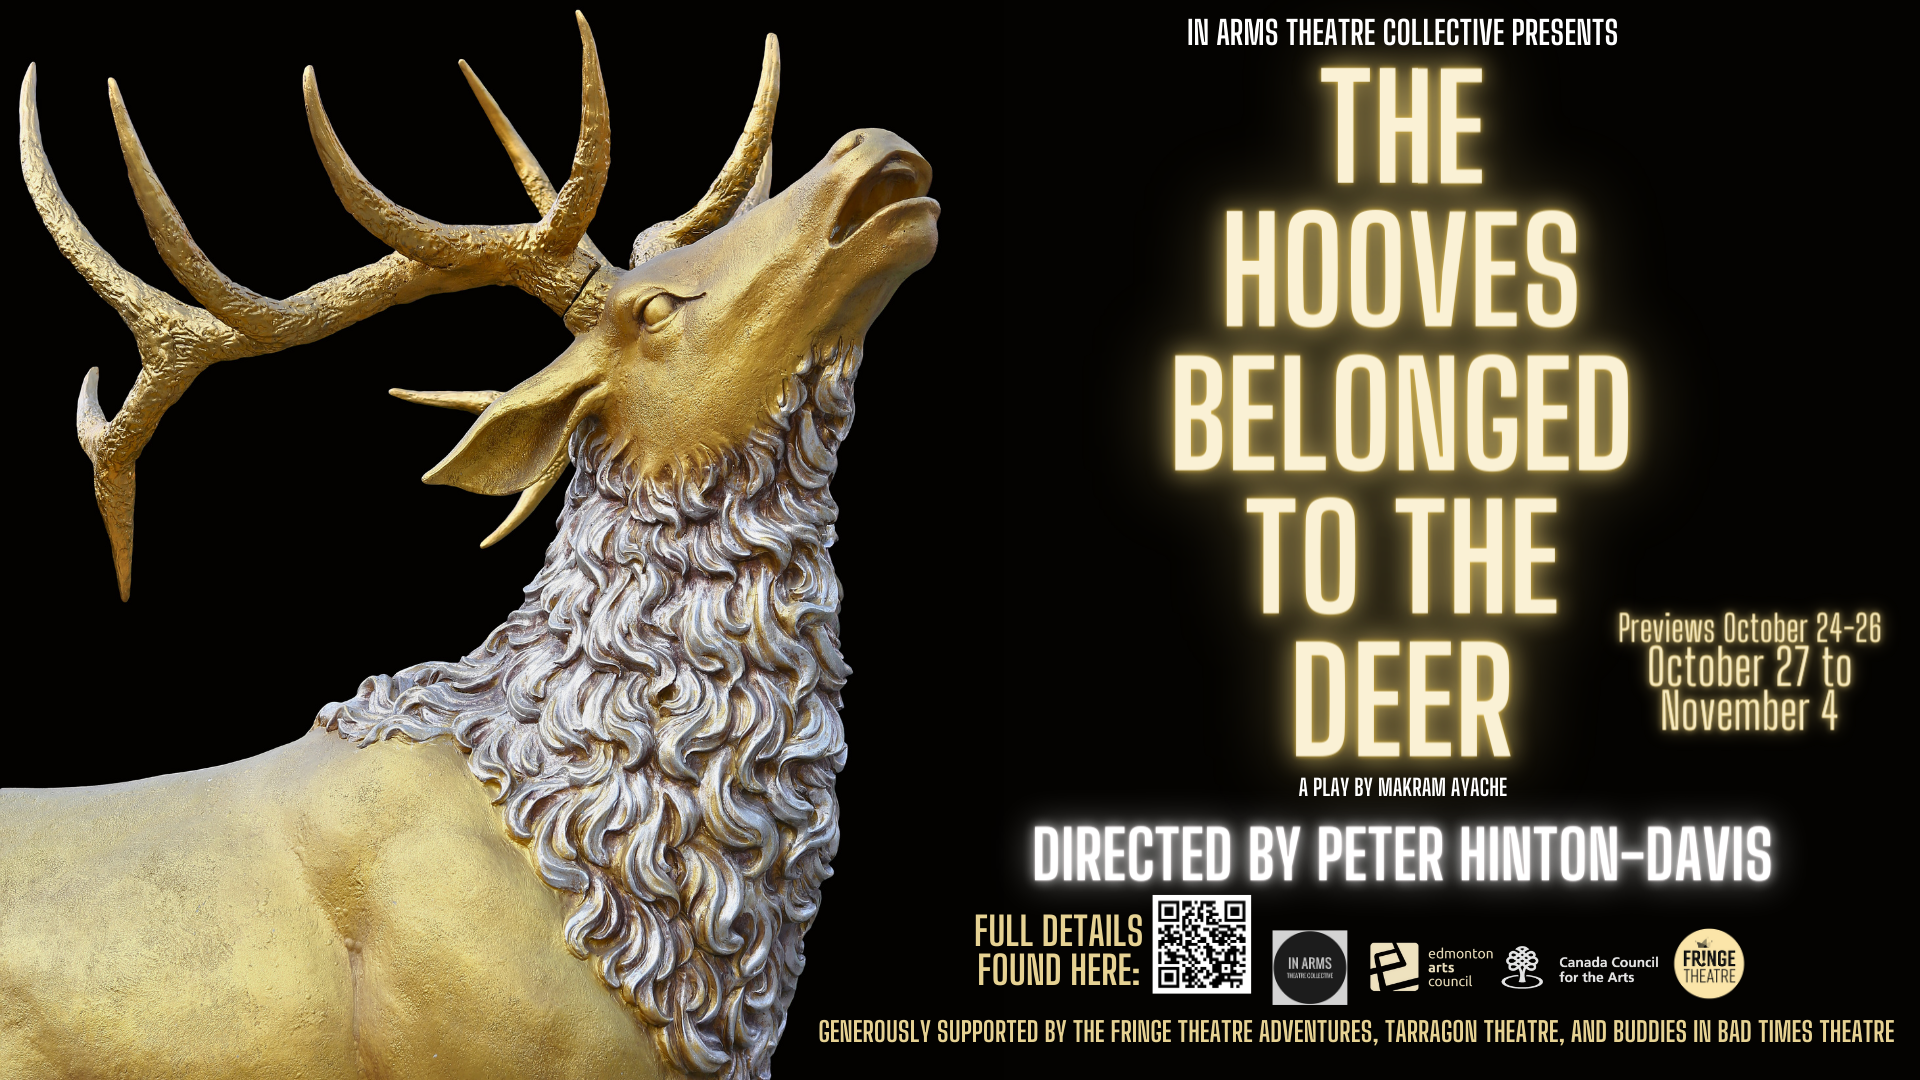 Main poster for The Hooves Belonged to the Deer featuring a golden stag as an image. 